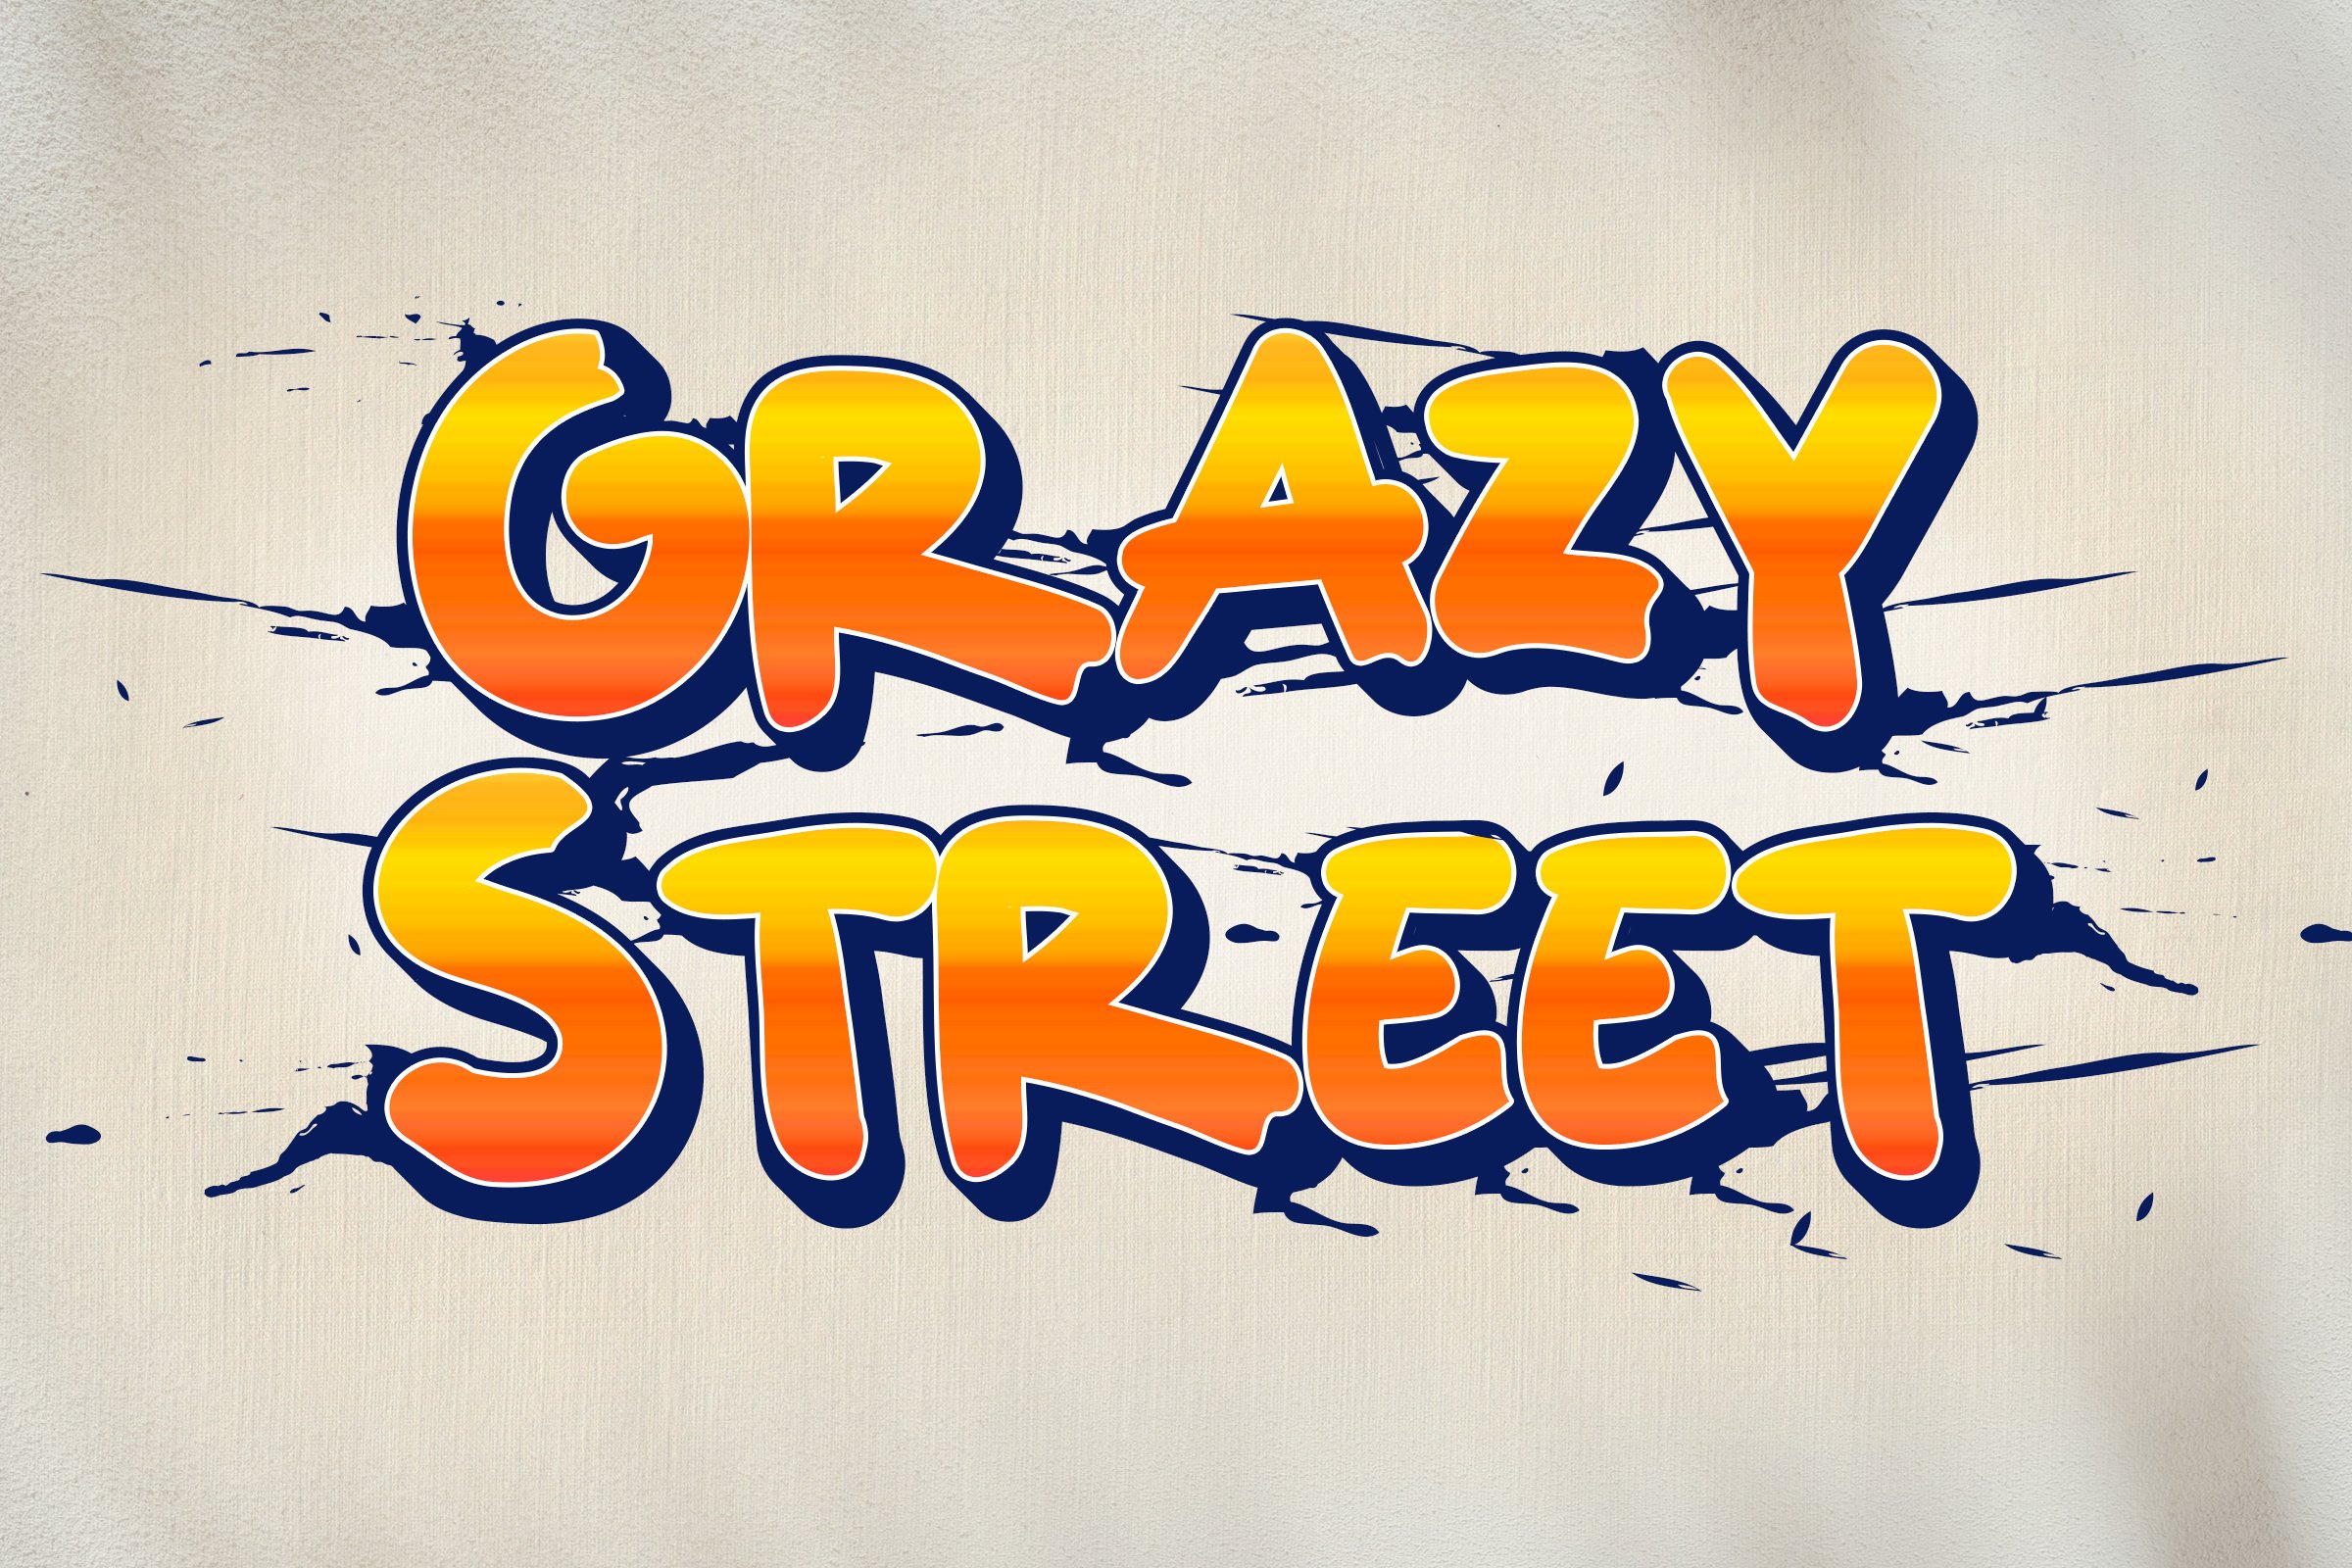 Grazy Street - Display Font cover image.